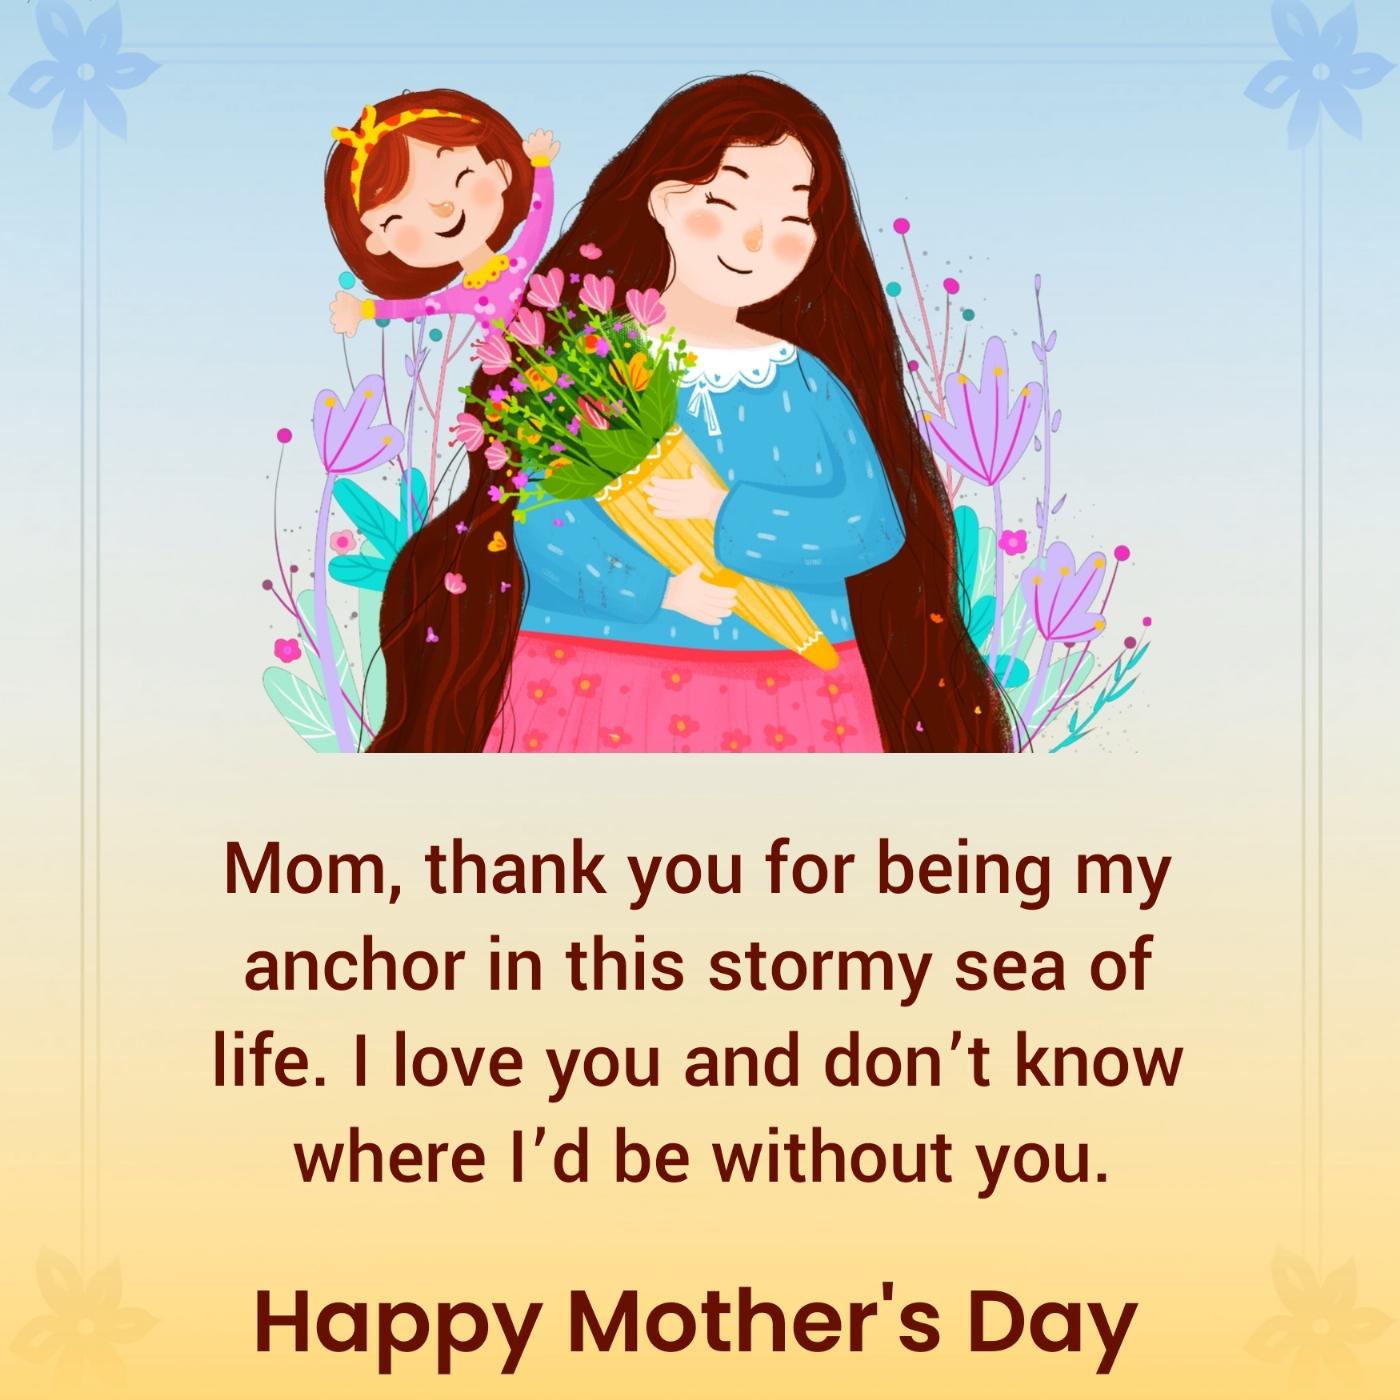 Mom thank you for being my anchor in this stormy sea of life